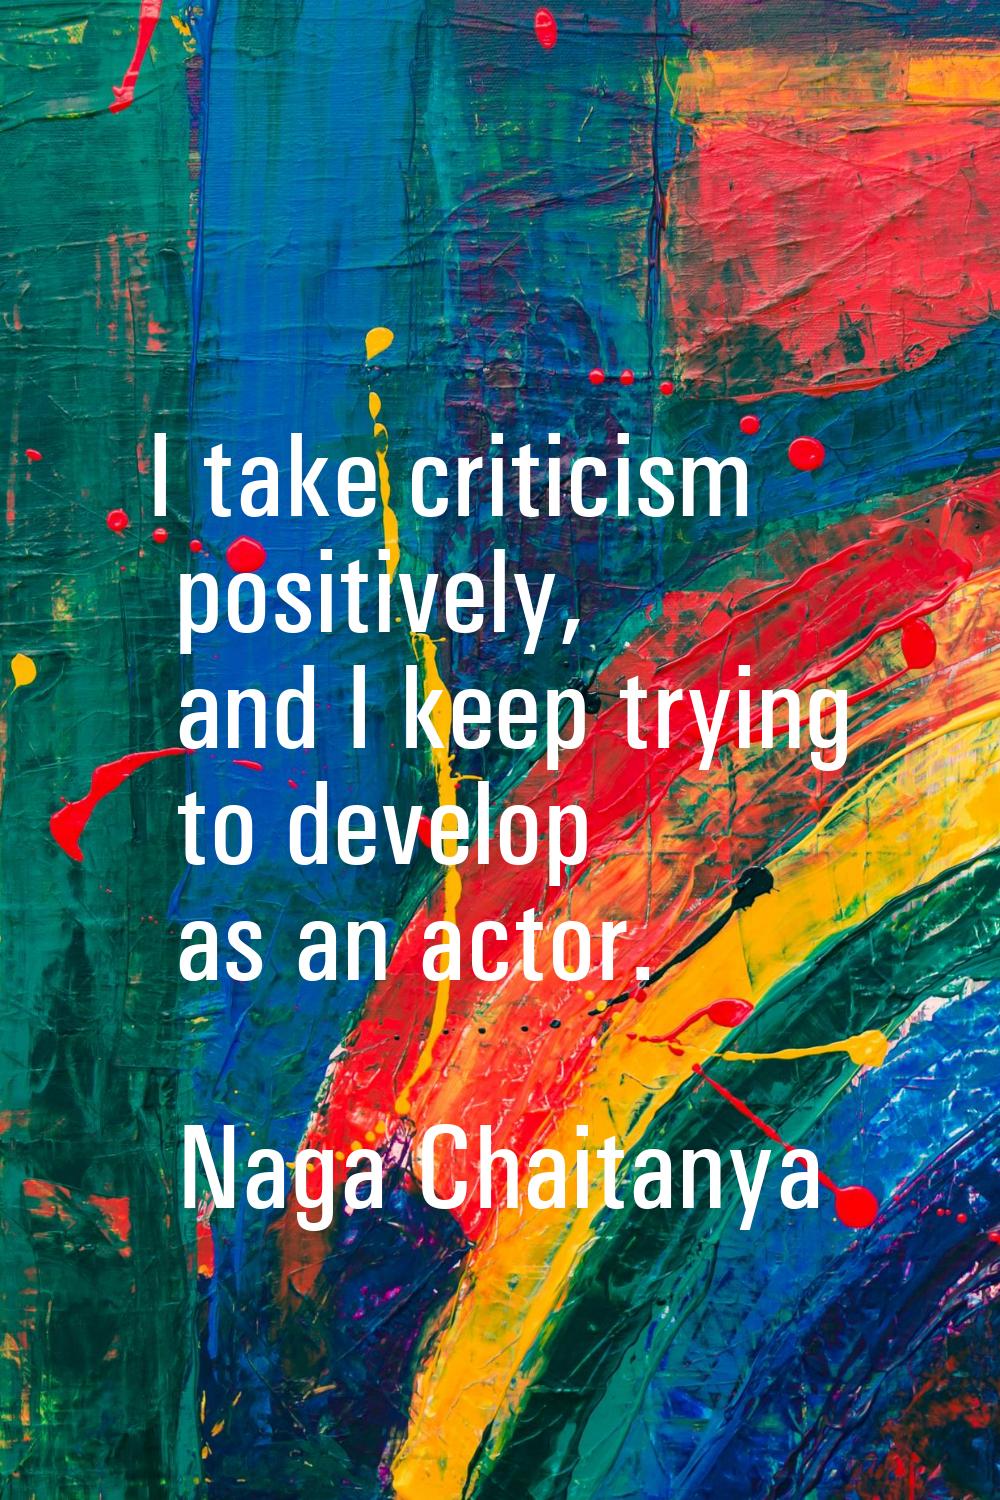 I take criticism positively, and I keep trying to develop as an actor.